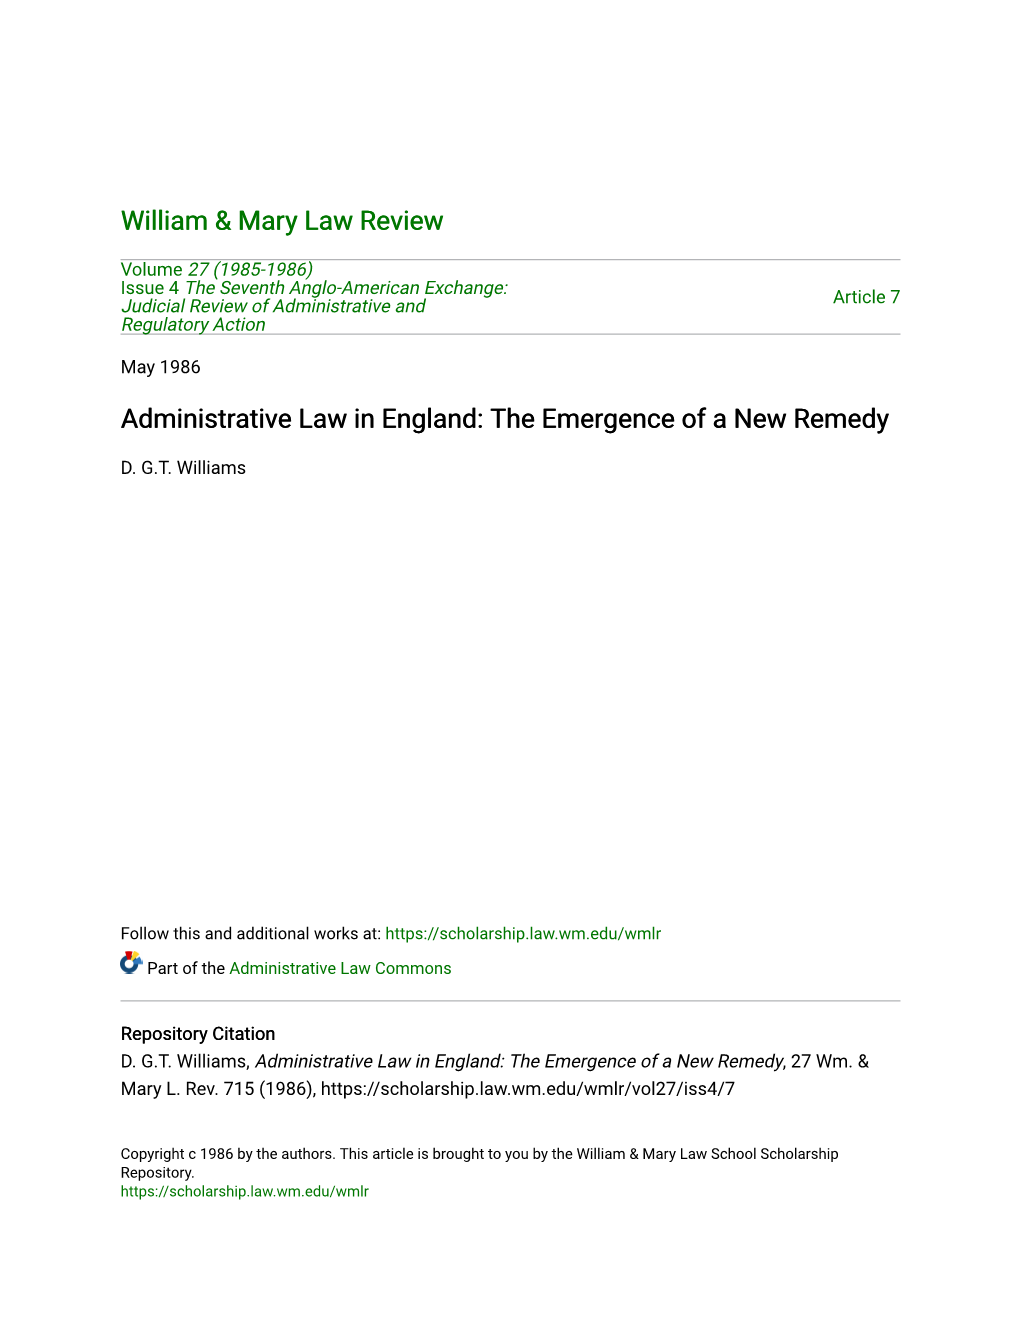 Administrative Law in England: the Emergence of a New Remedy